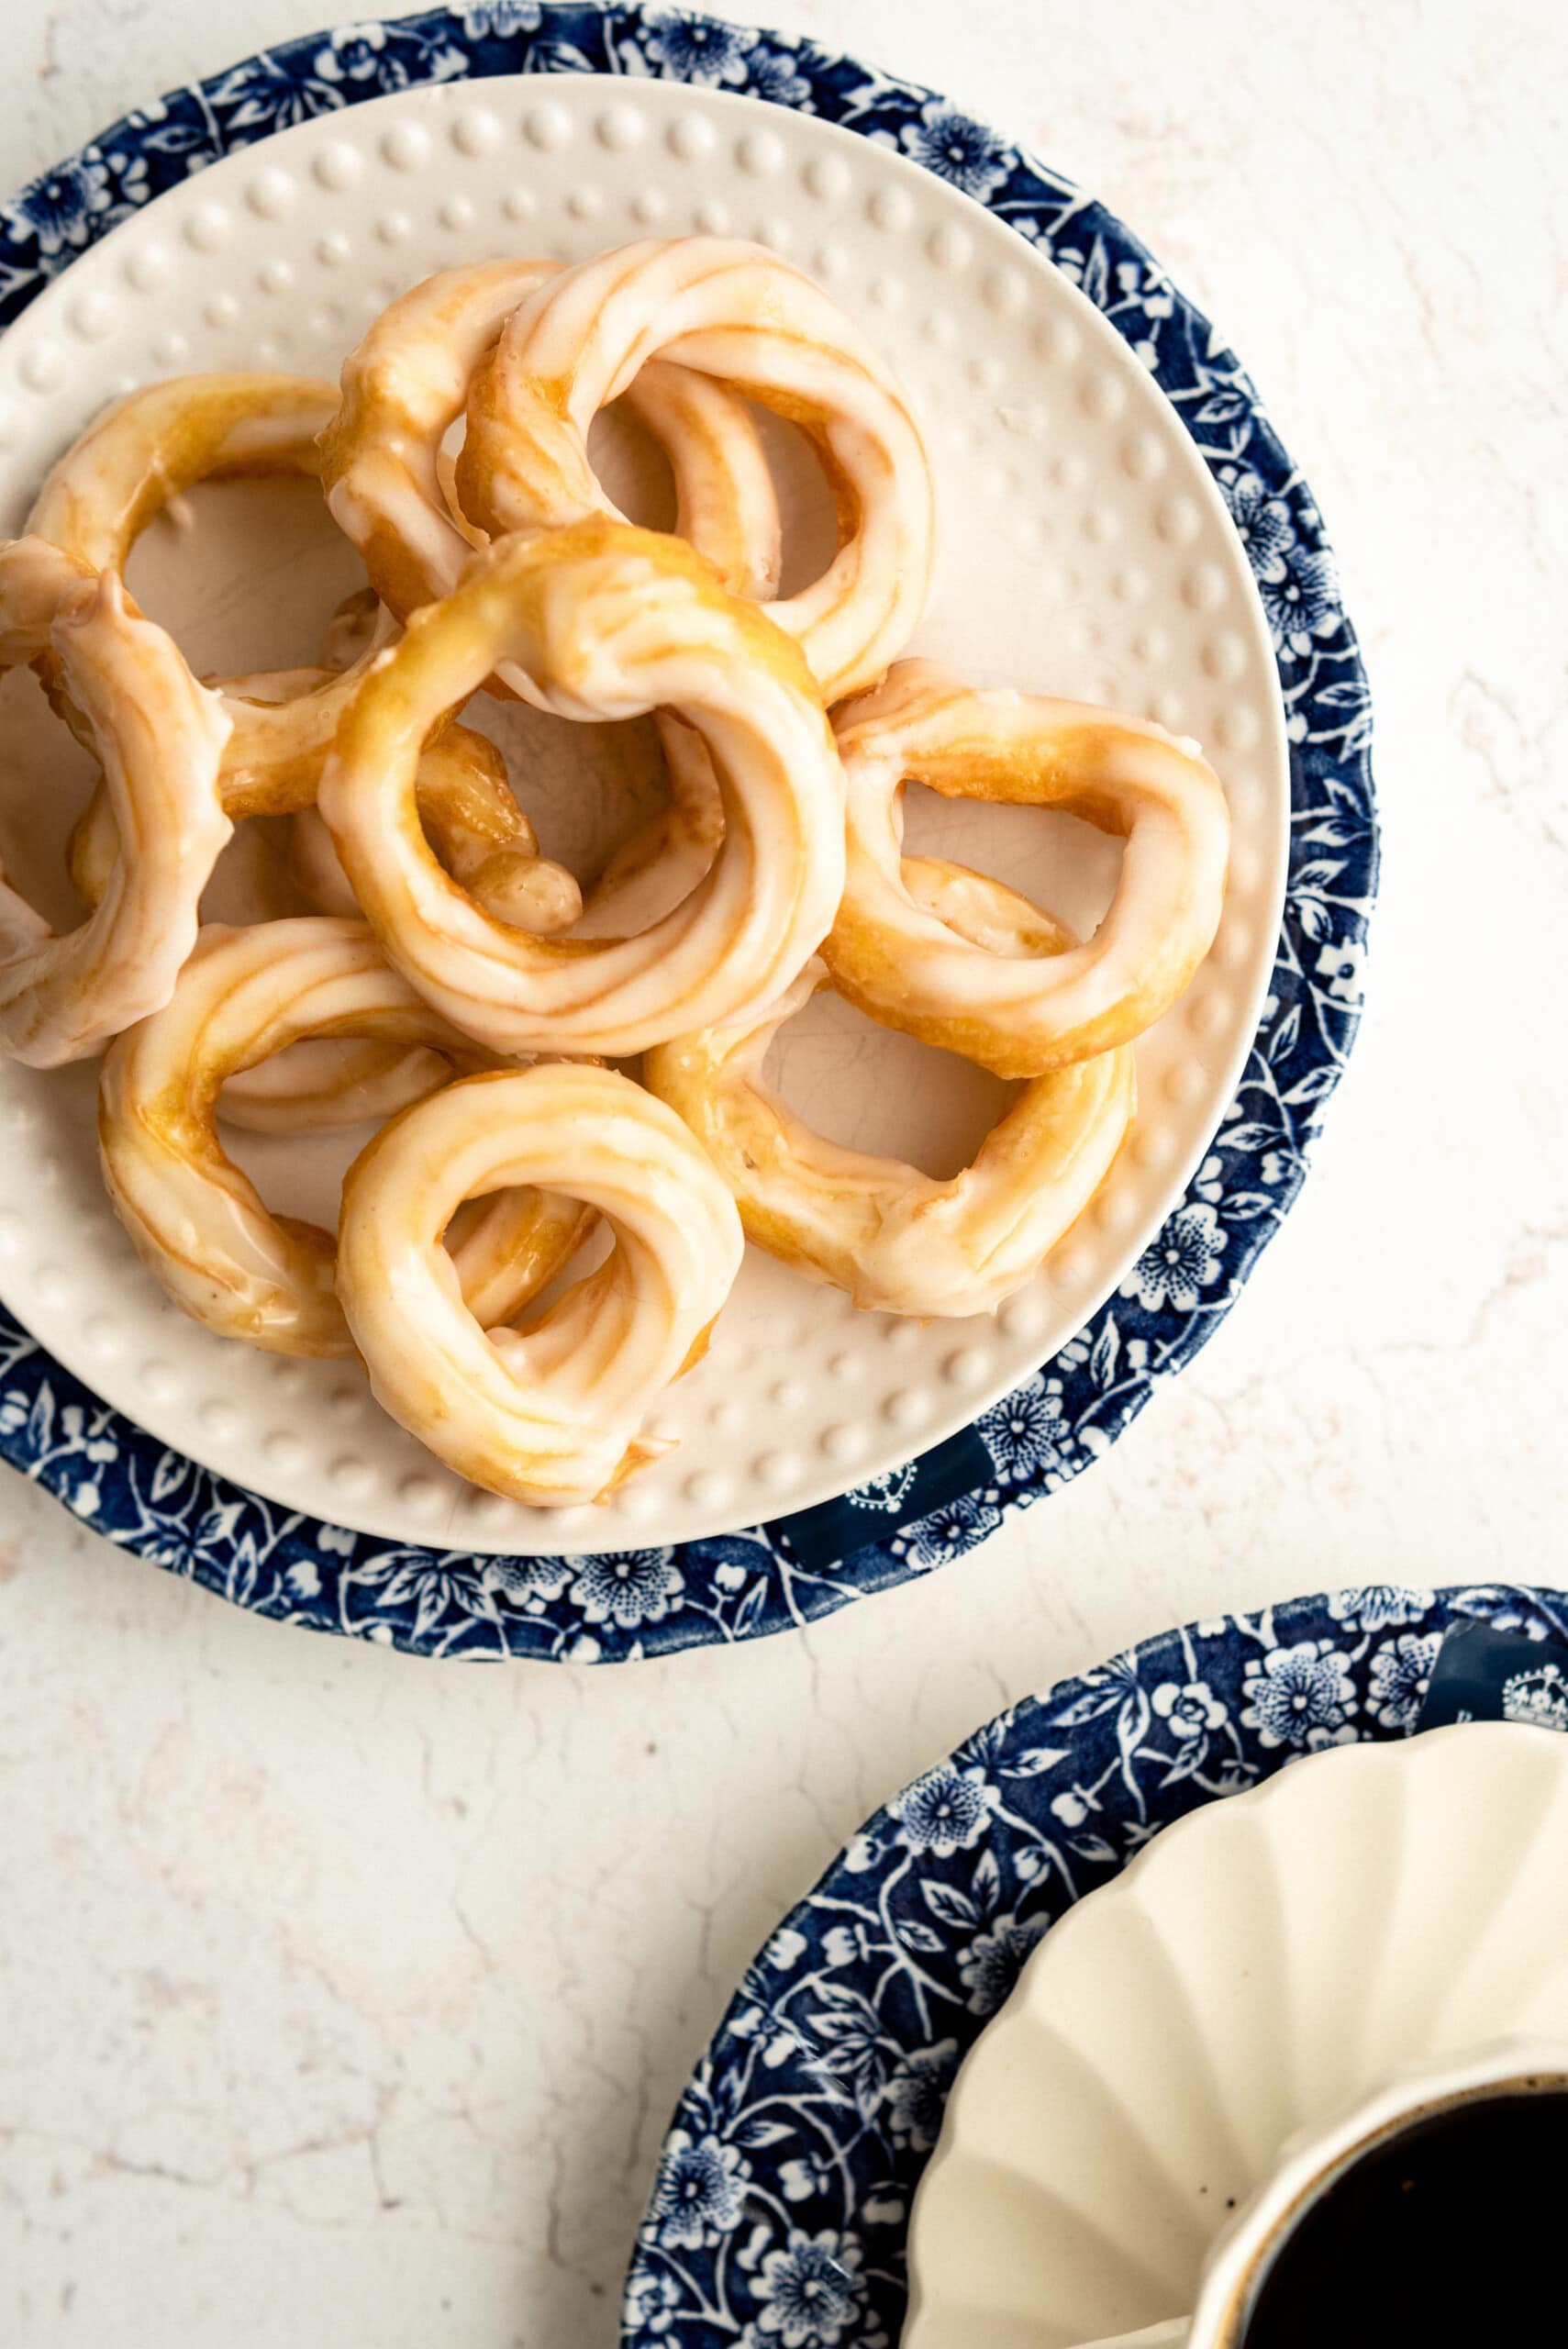 crullers on a white plate